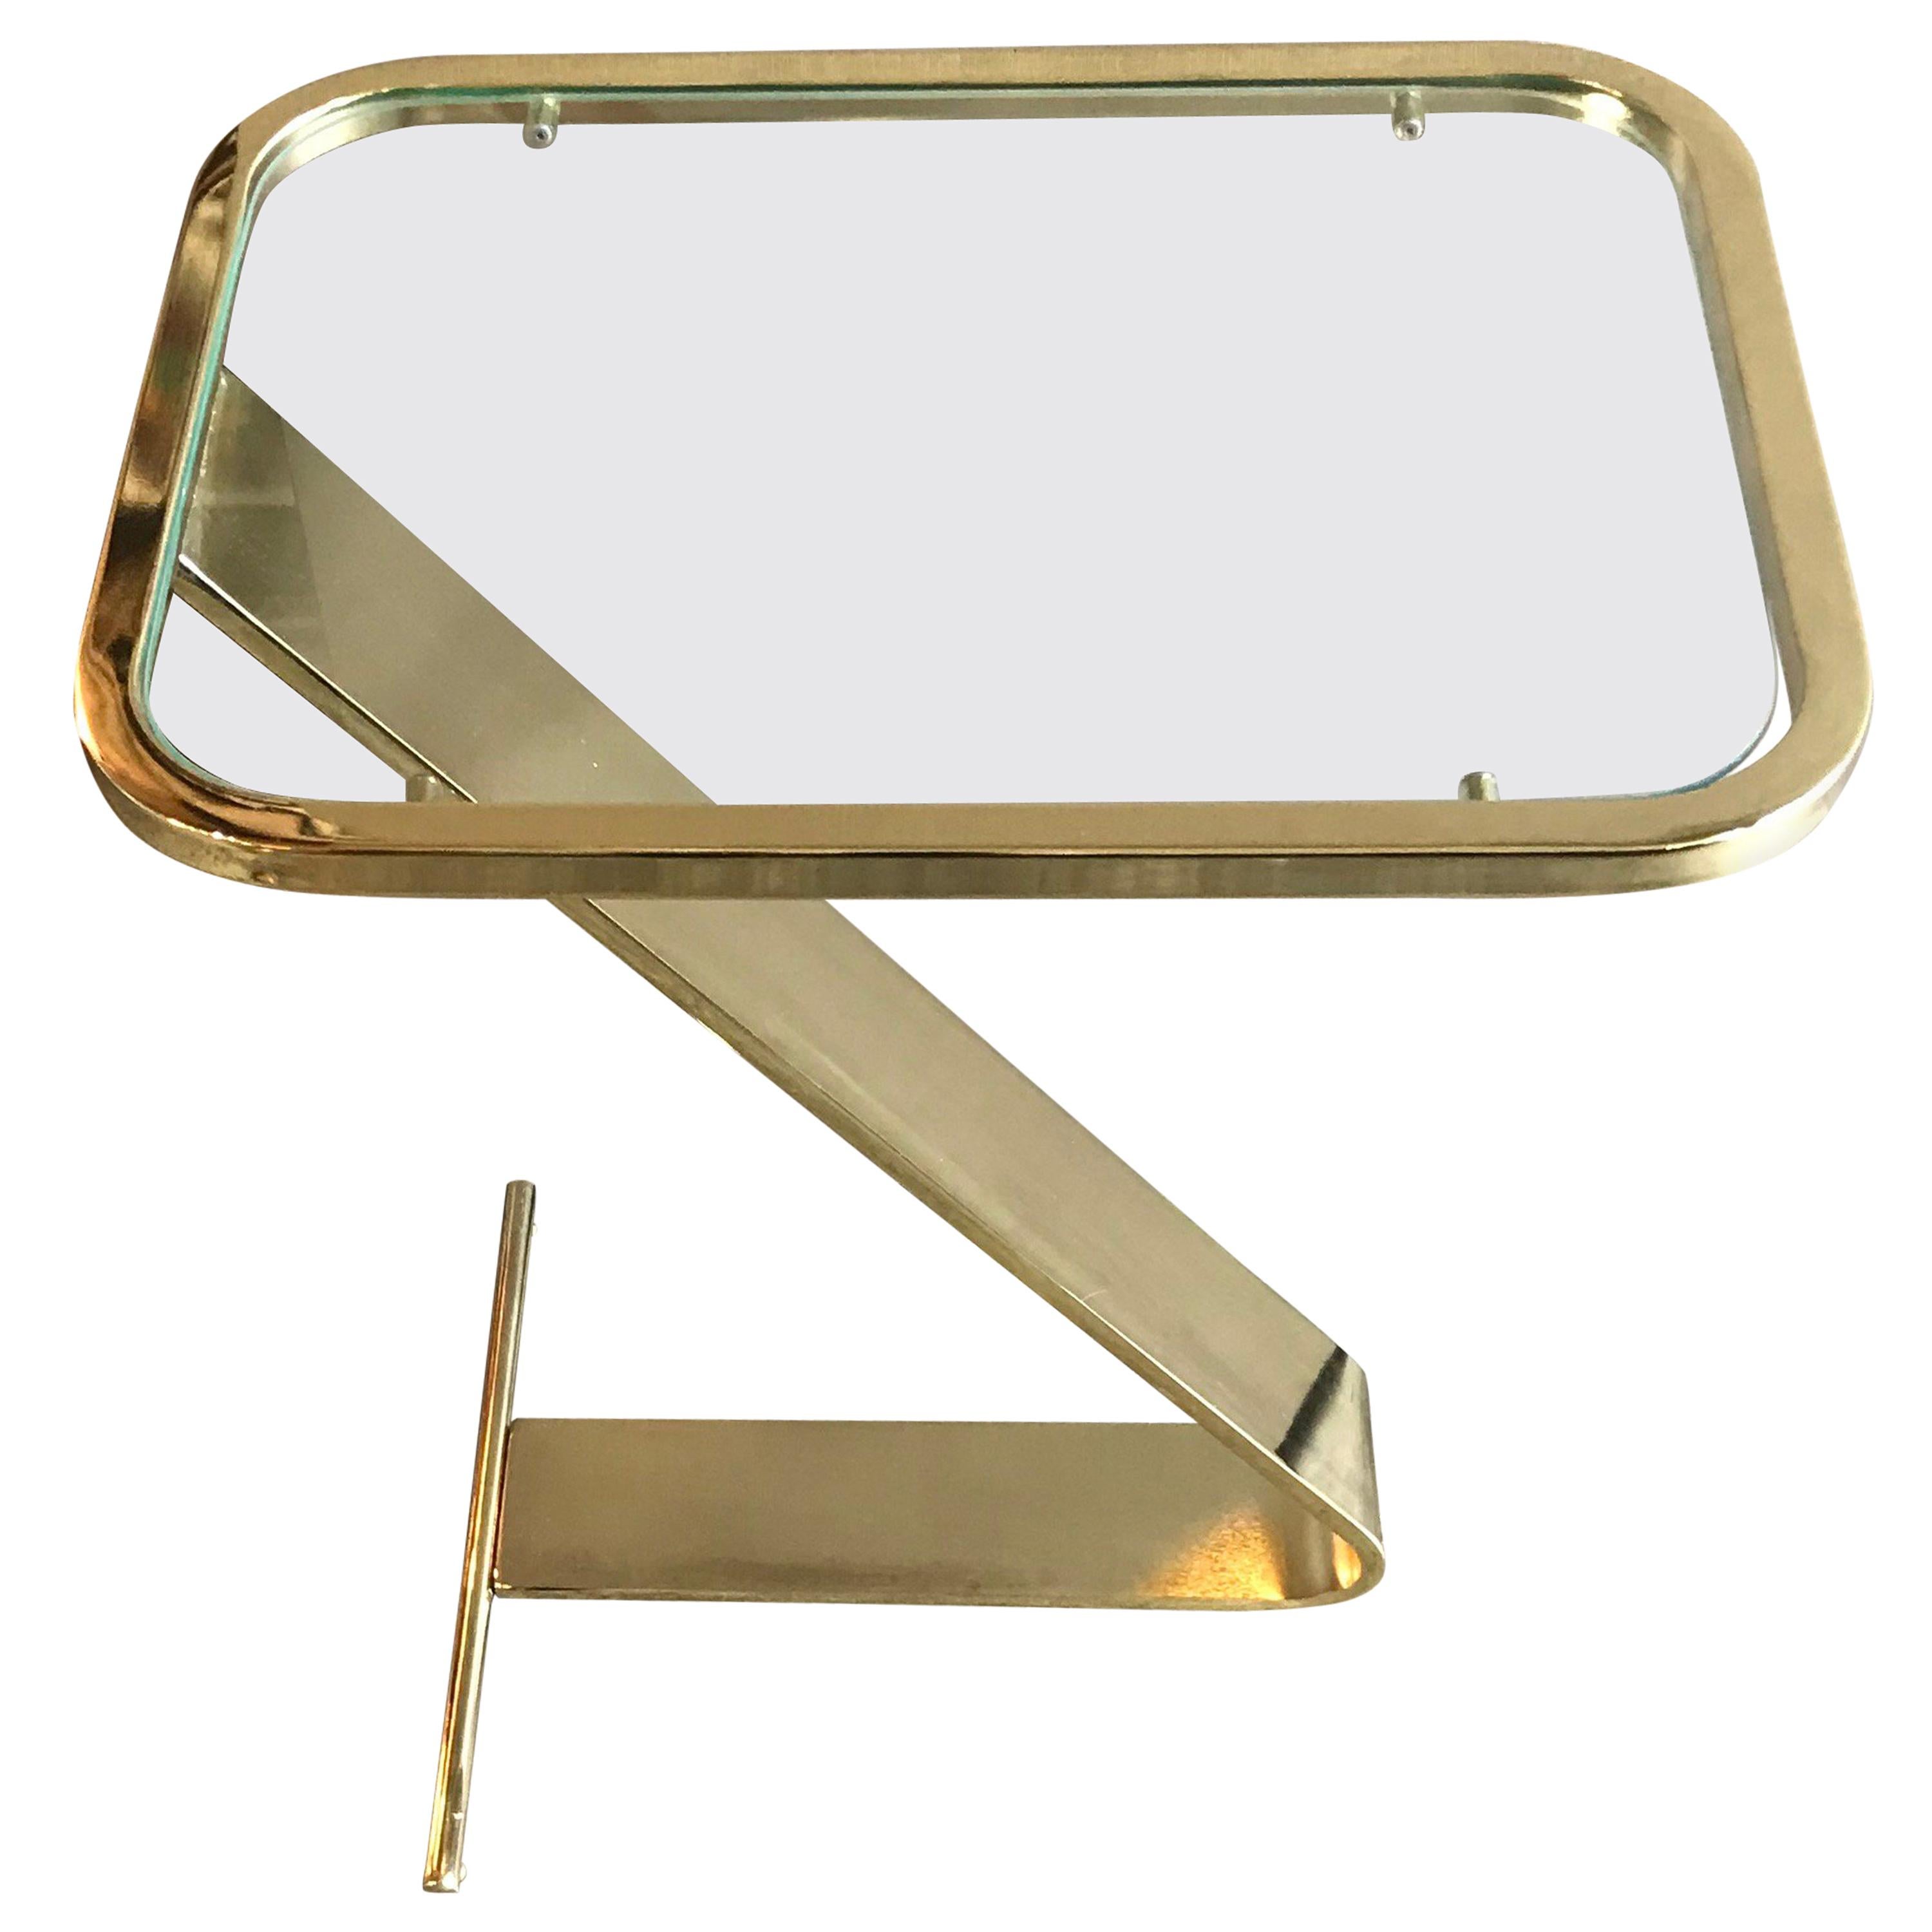 Design Institute of America Brass and Glass Side Table